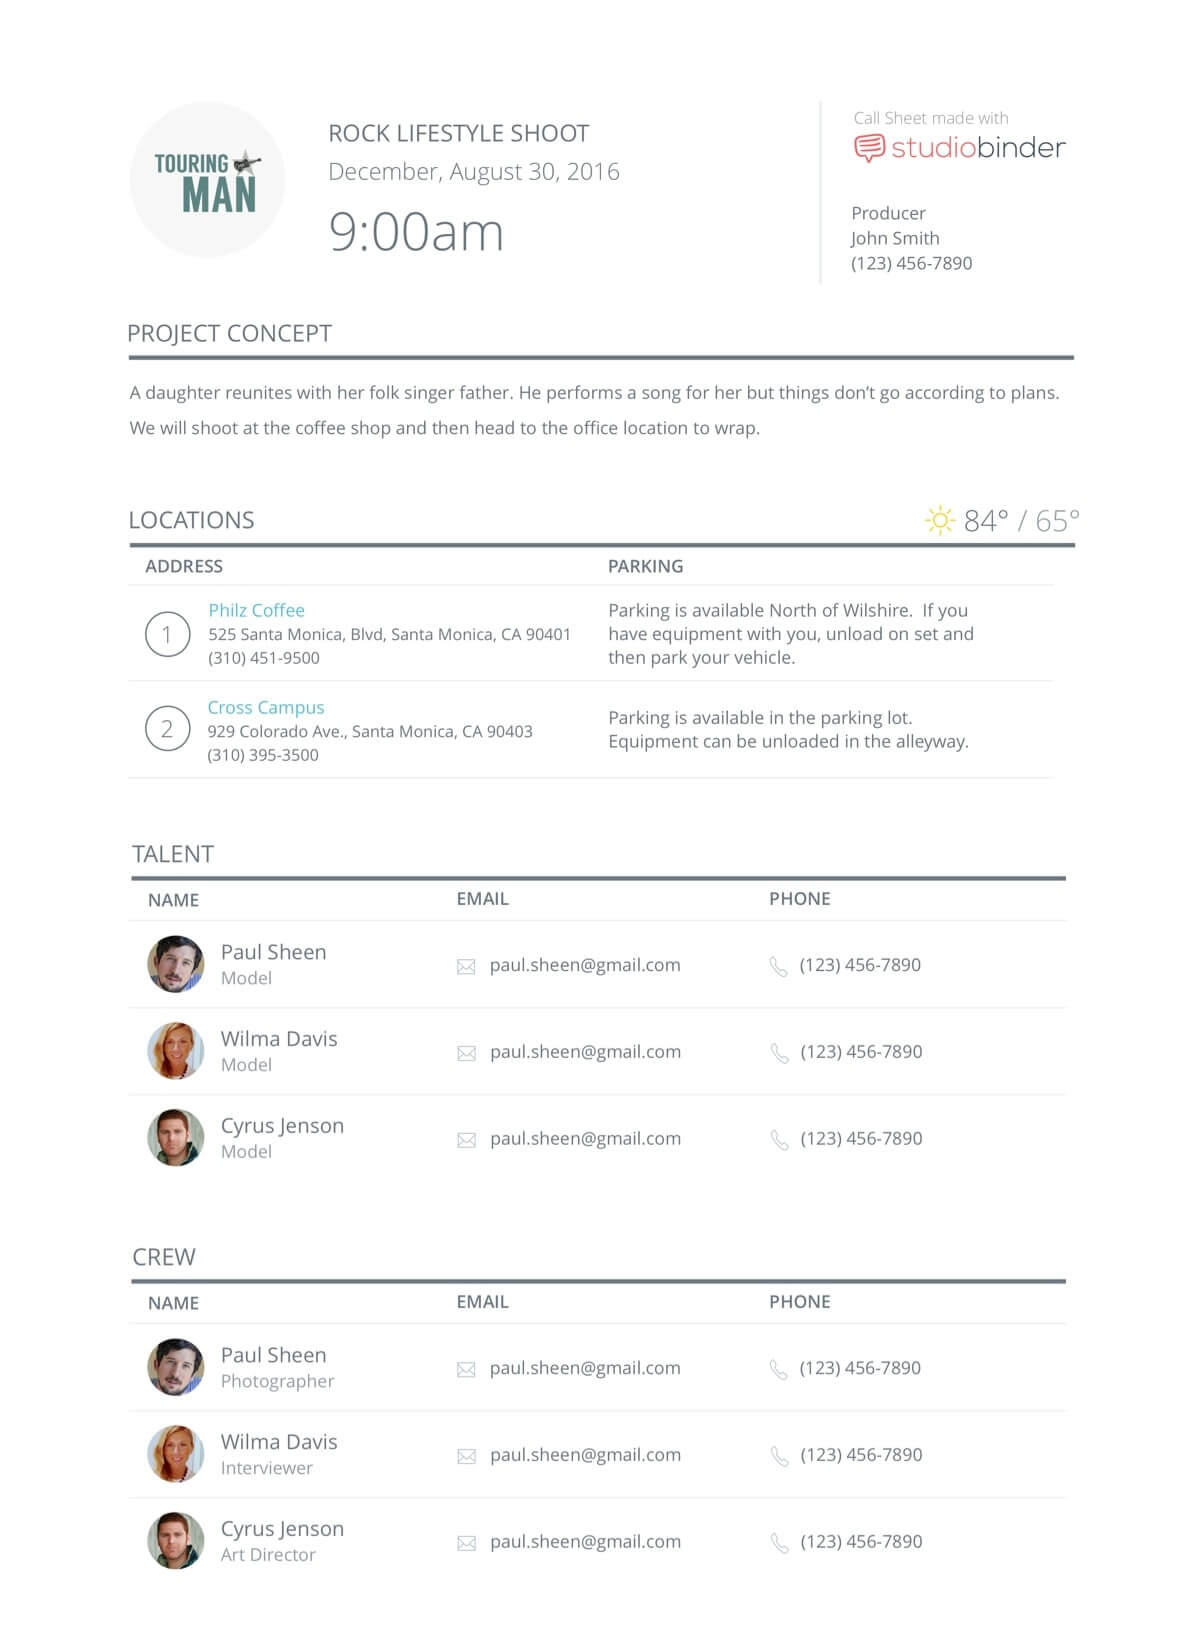 Online Call Sheet Templates For